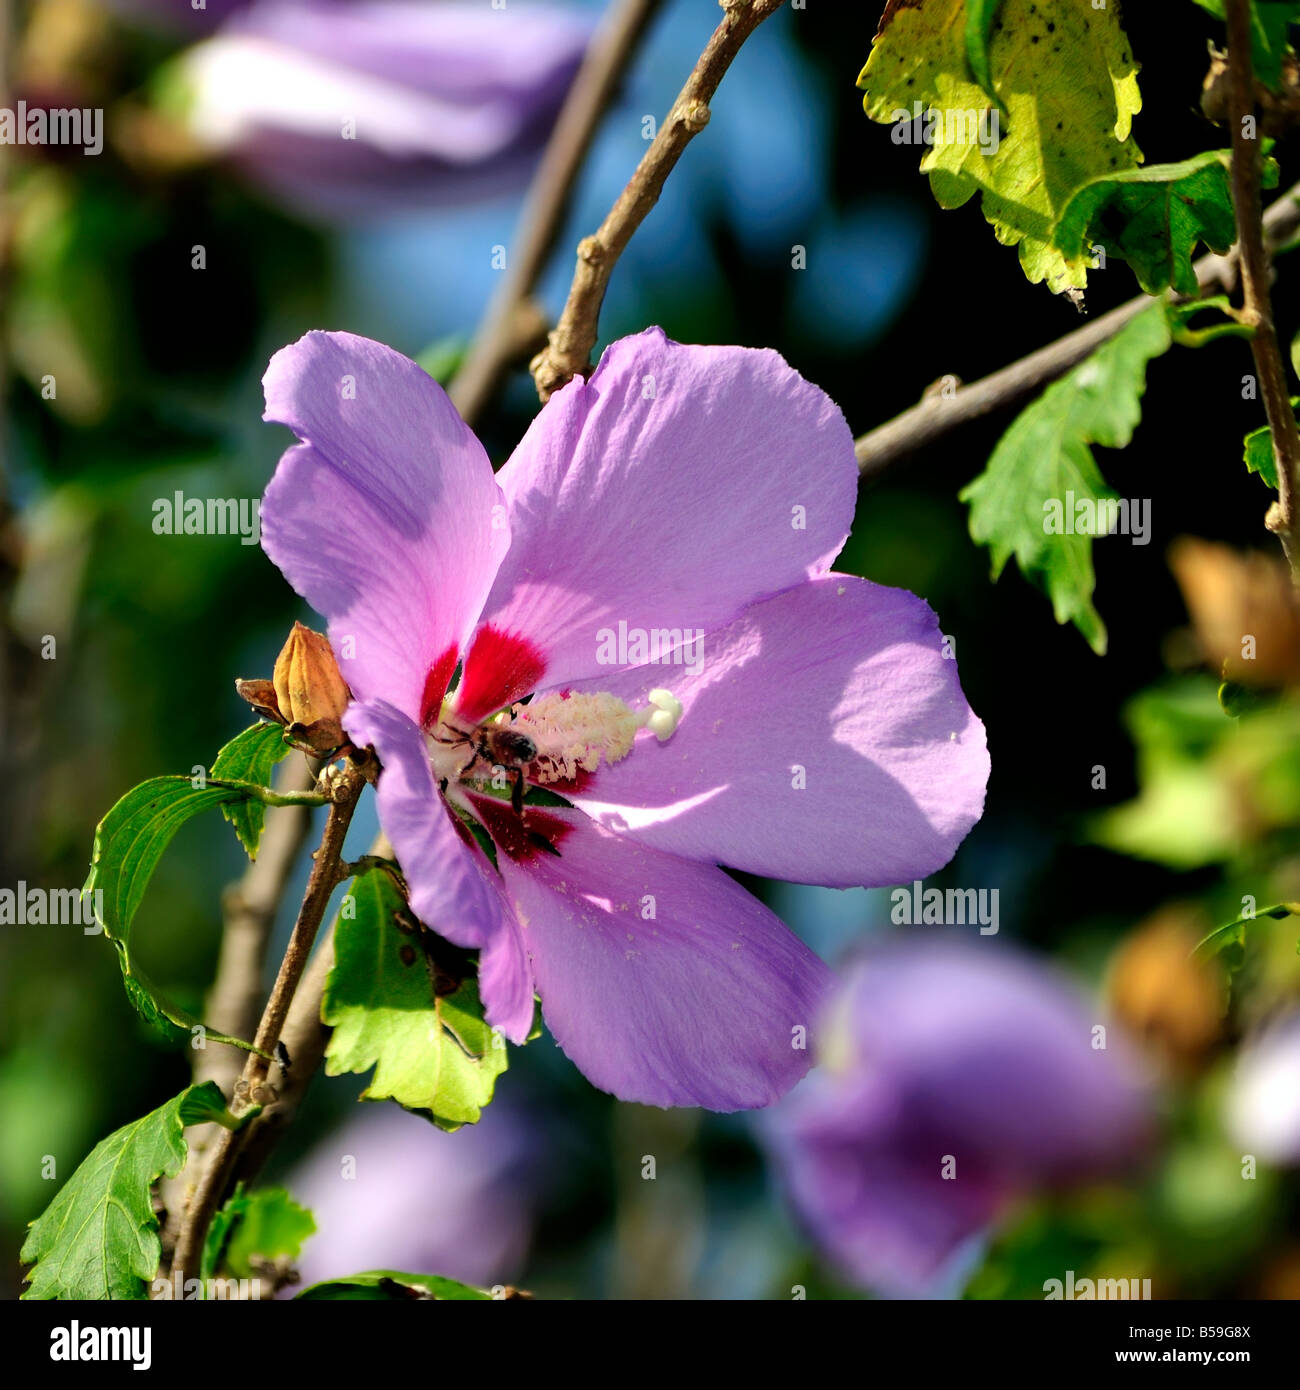 Blooms of the Rose of Sharon, Hibiscus syriacus. Oklahoma, USA. Stock Photo